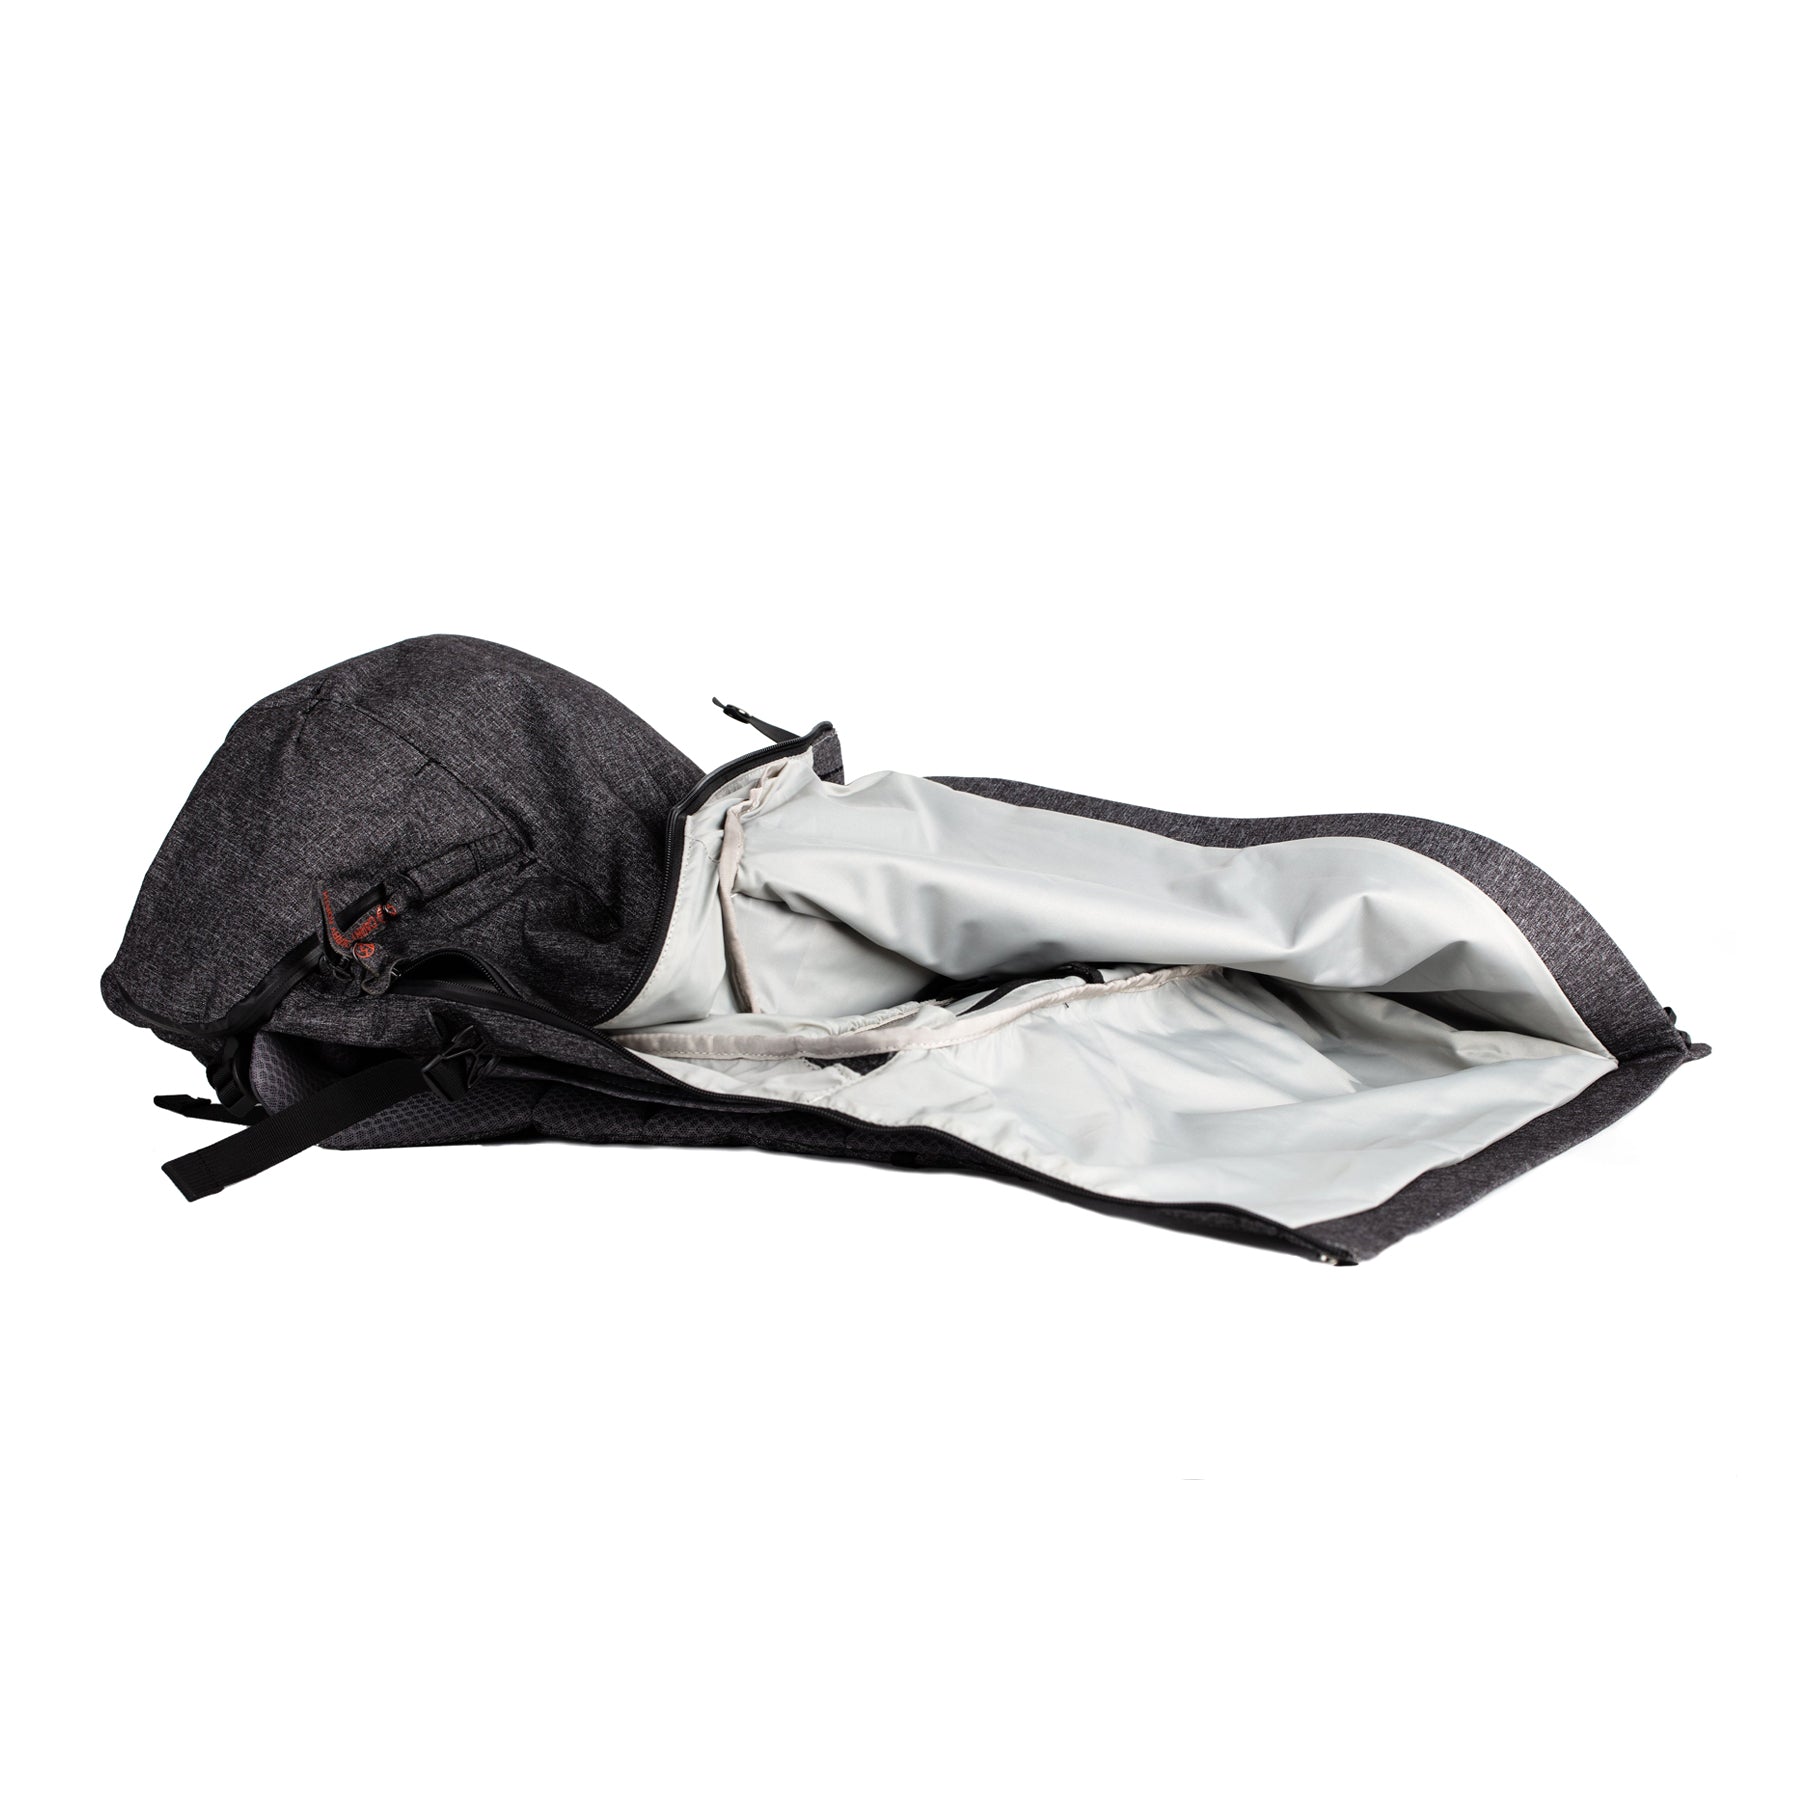 Open Midnight Black Tahquitz Pack with side unzipped showing off cavernous volume of pack